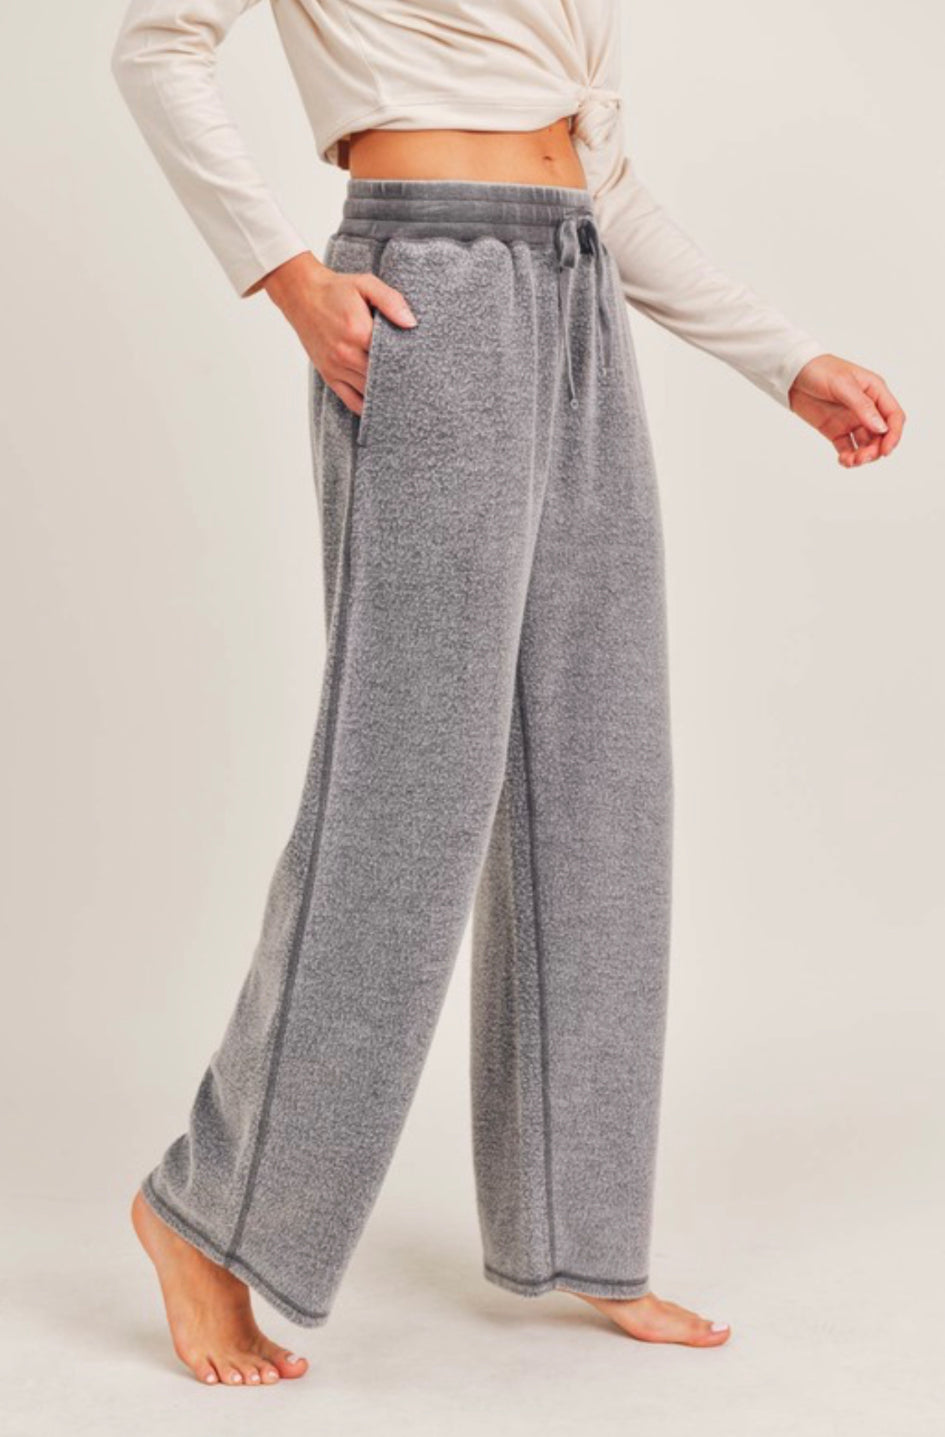 Fuzzy Mineral-Washed Lounge Pants //GRAY//